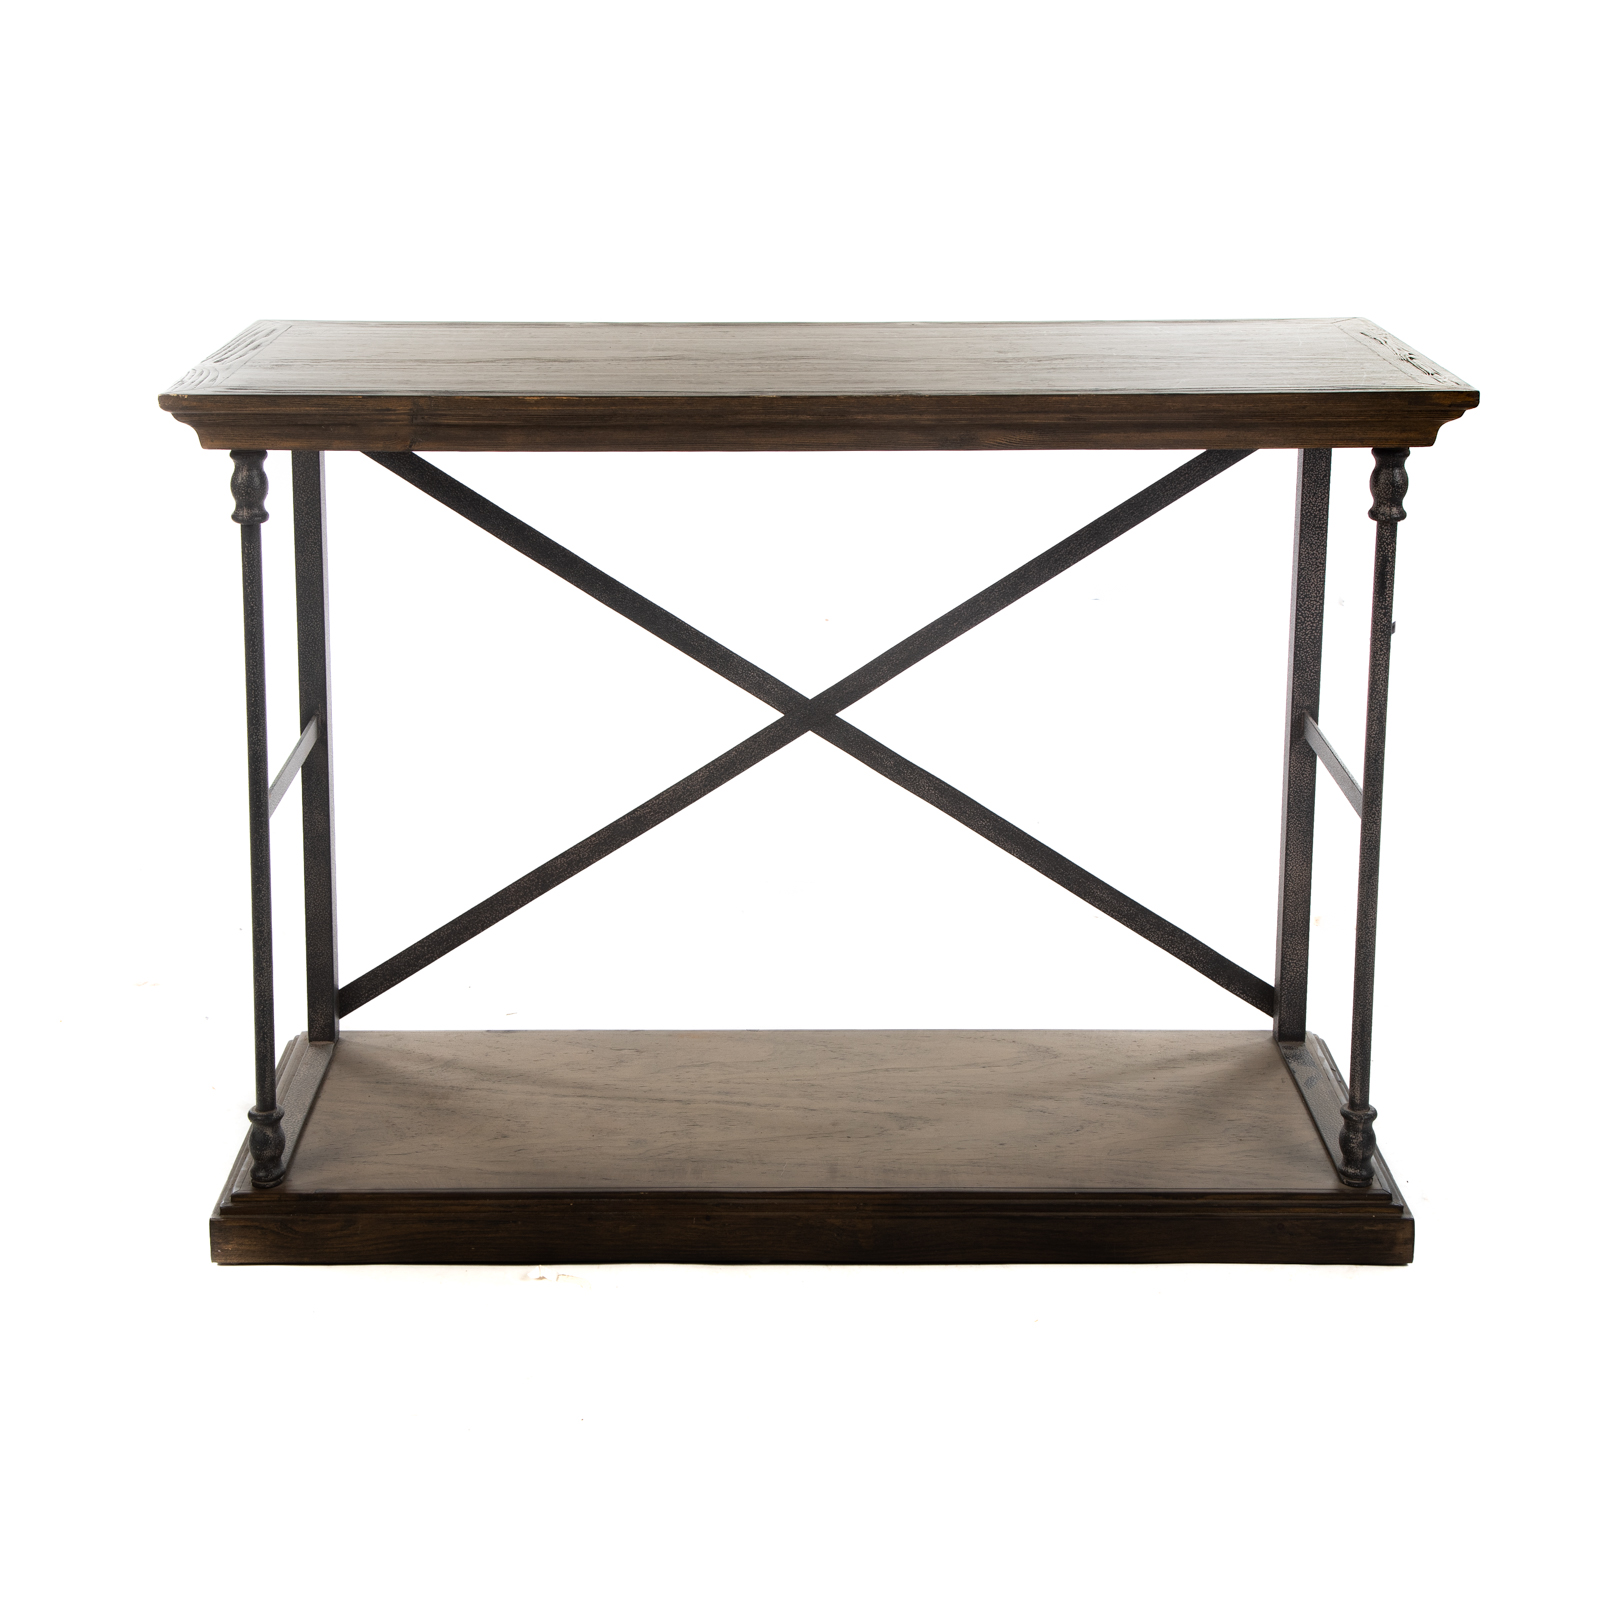 RUSTIC WOOD METAL CONSOLE TABLE 2875d4